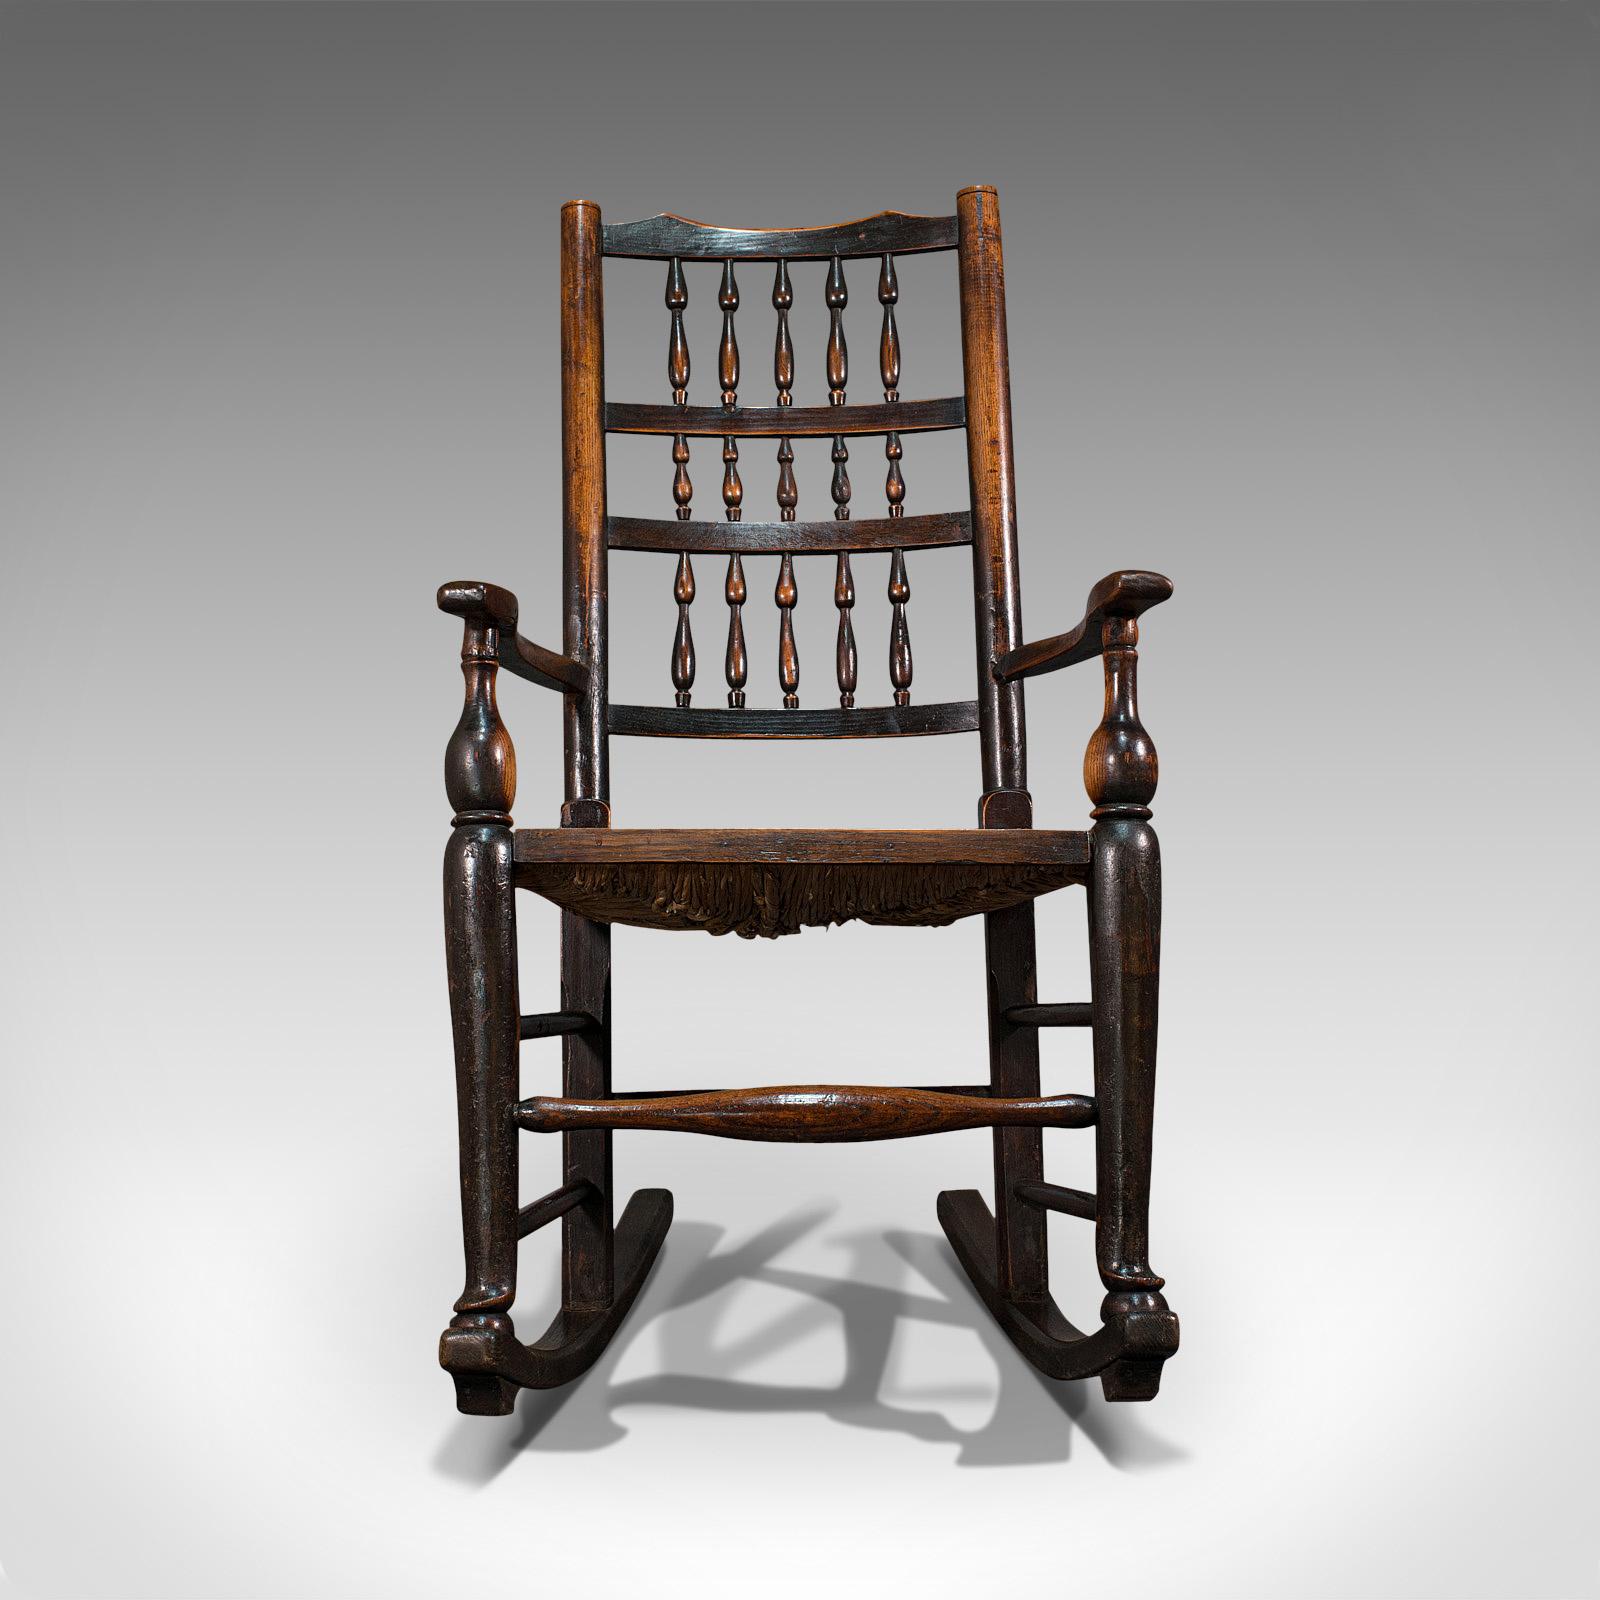 This is an antique Lancashire rocking chair. An English, ash and elm spindle back seat, dating to the Georgian period and later, circa 1800.

Wonderful country-house appeal
Displays a desirable aged patina throughout
Ash and elm offer fine grain